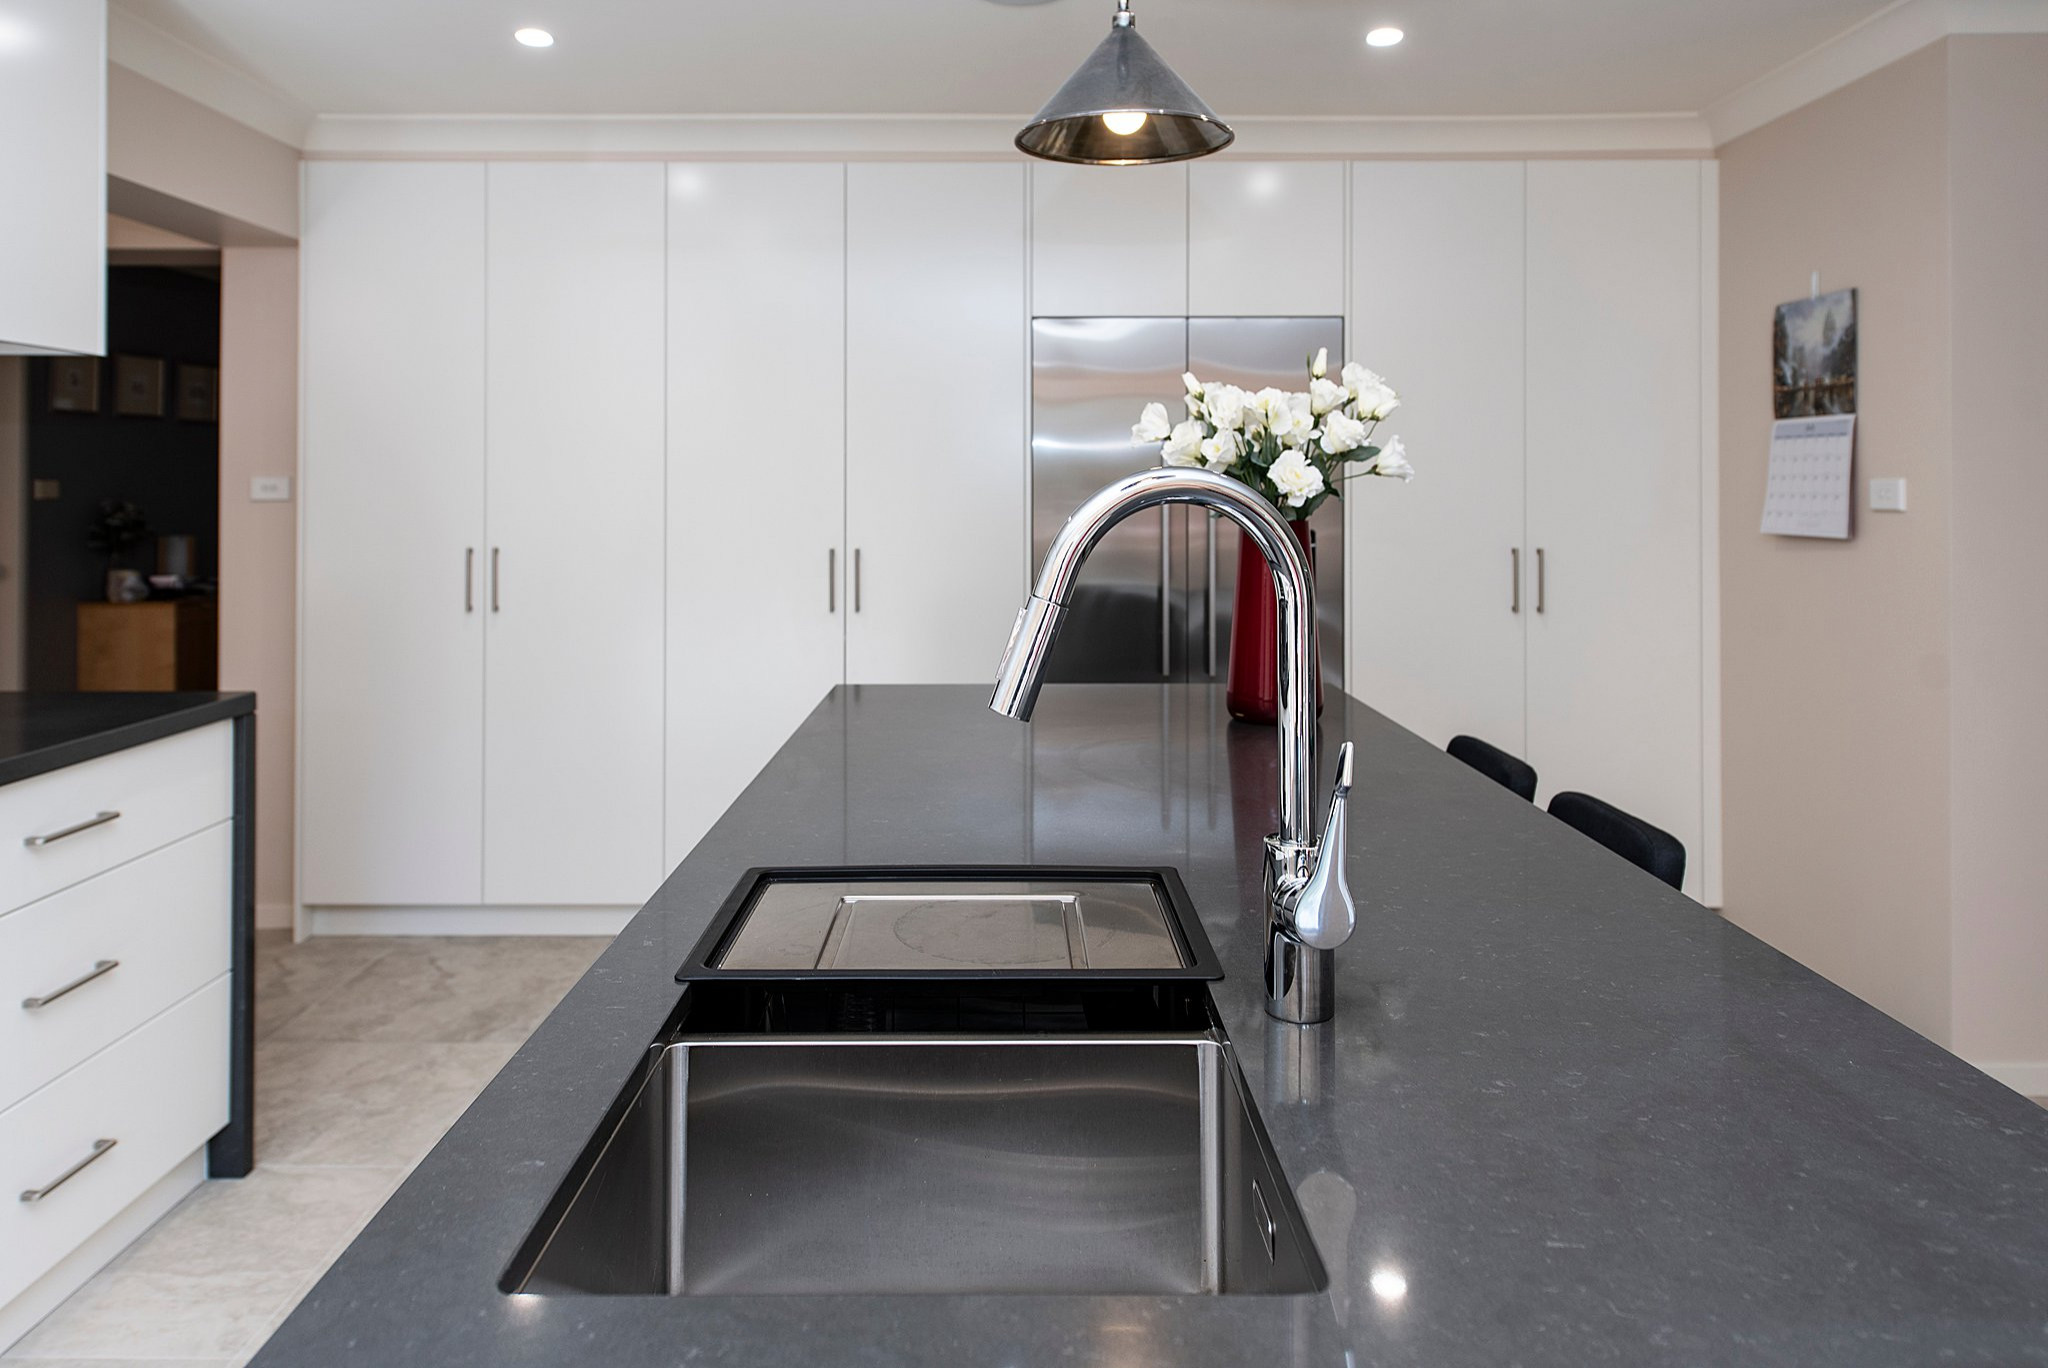 Contempory Kitchen With Caesar Stone, Contemporary Modern Leather Benchtops